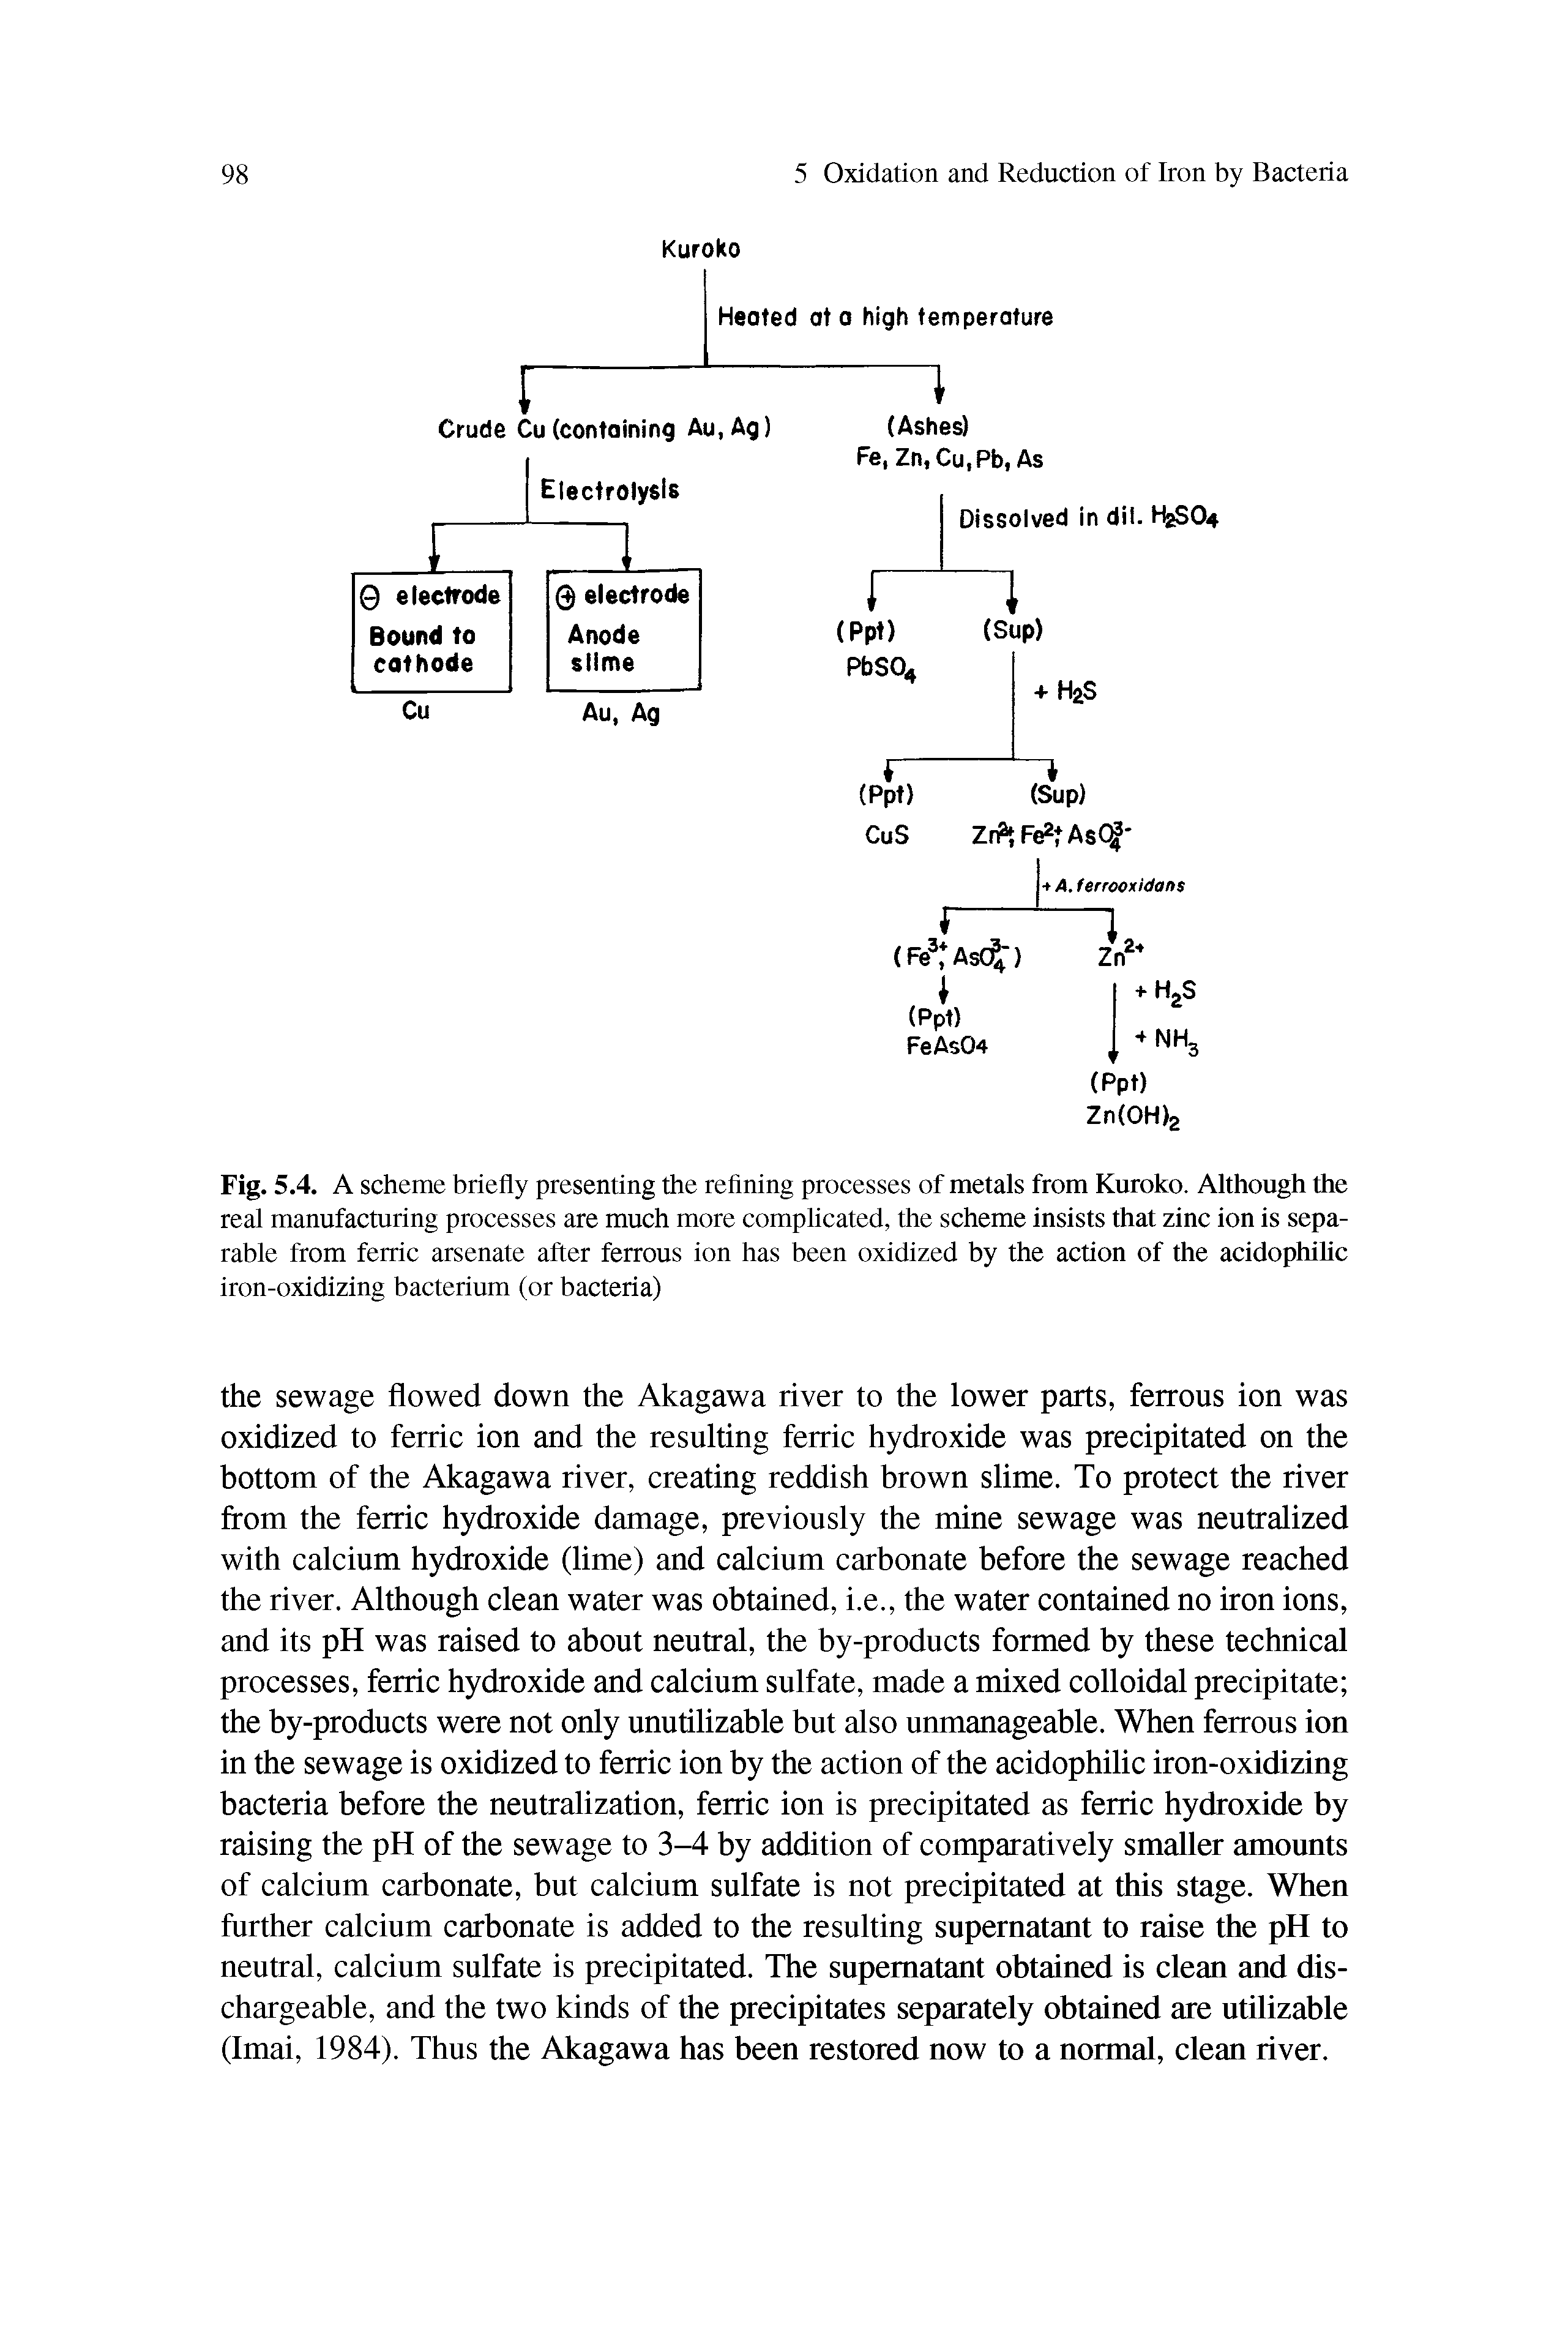 Fig. 5.4. A scheme briefly presenting the refining processes of metals from Kuroko. Although the real manufacturing processes are much more complicated, the scheme insists that zinc ion is separable from ferric arsenate after ferrous ion has been oxidized by the action of the acidophilic iron-oxidizing bacterium (or bacteria)...